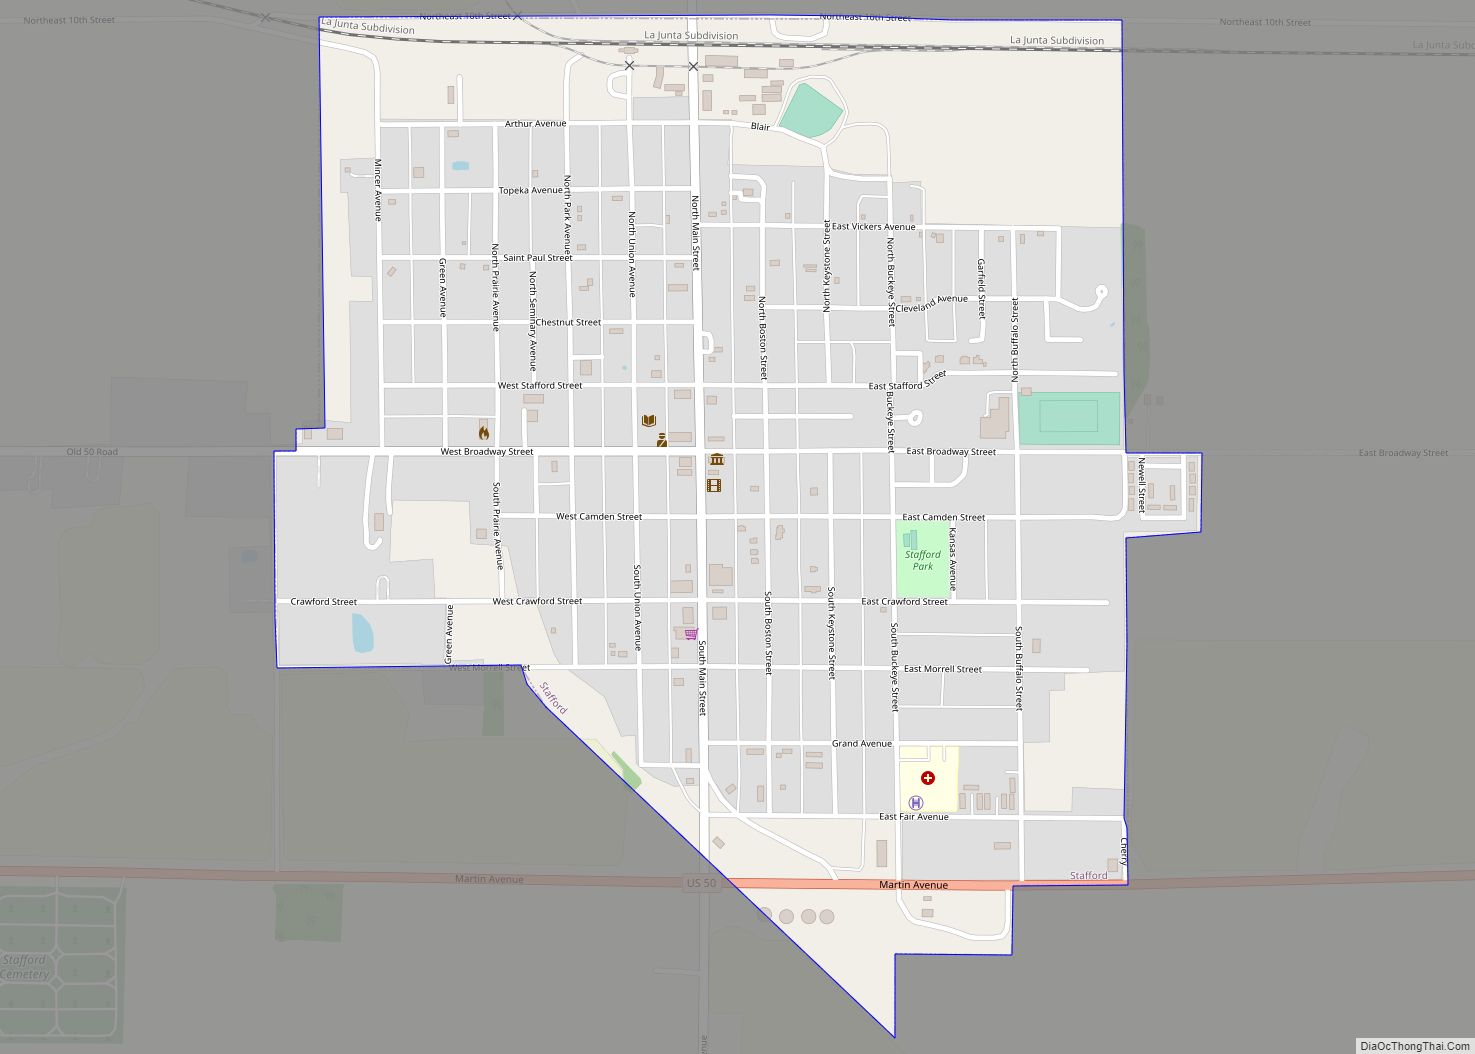 Map of Stafford city